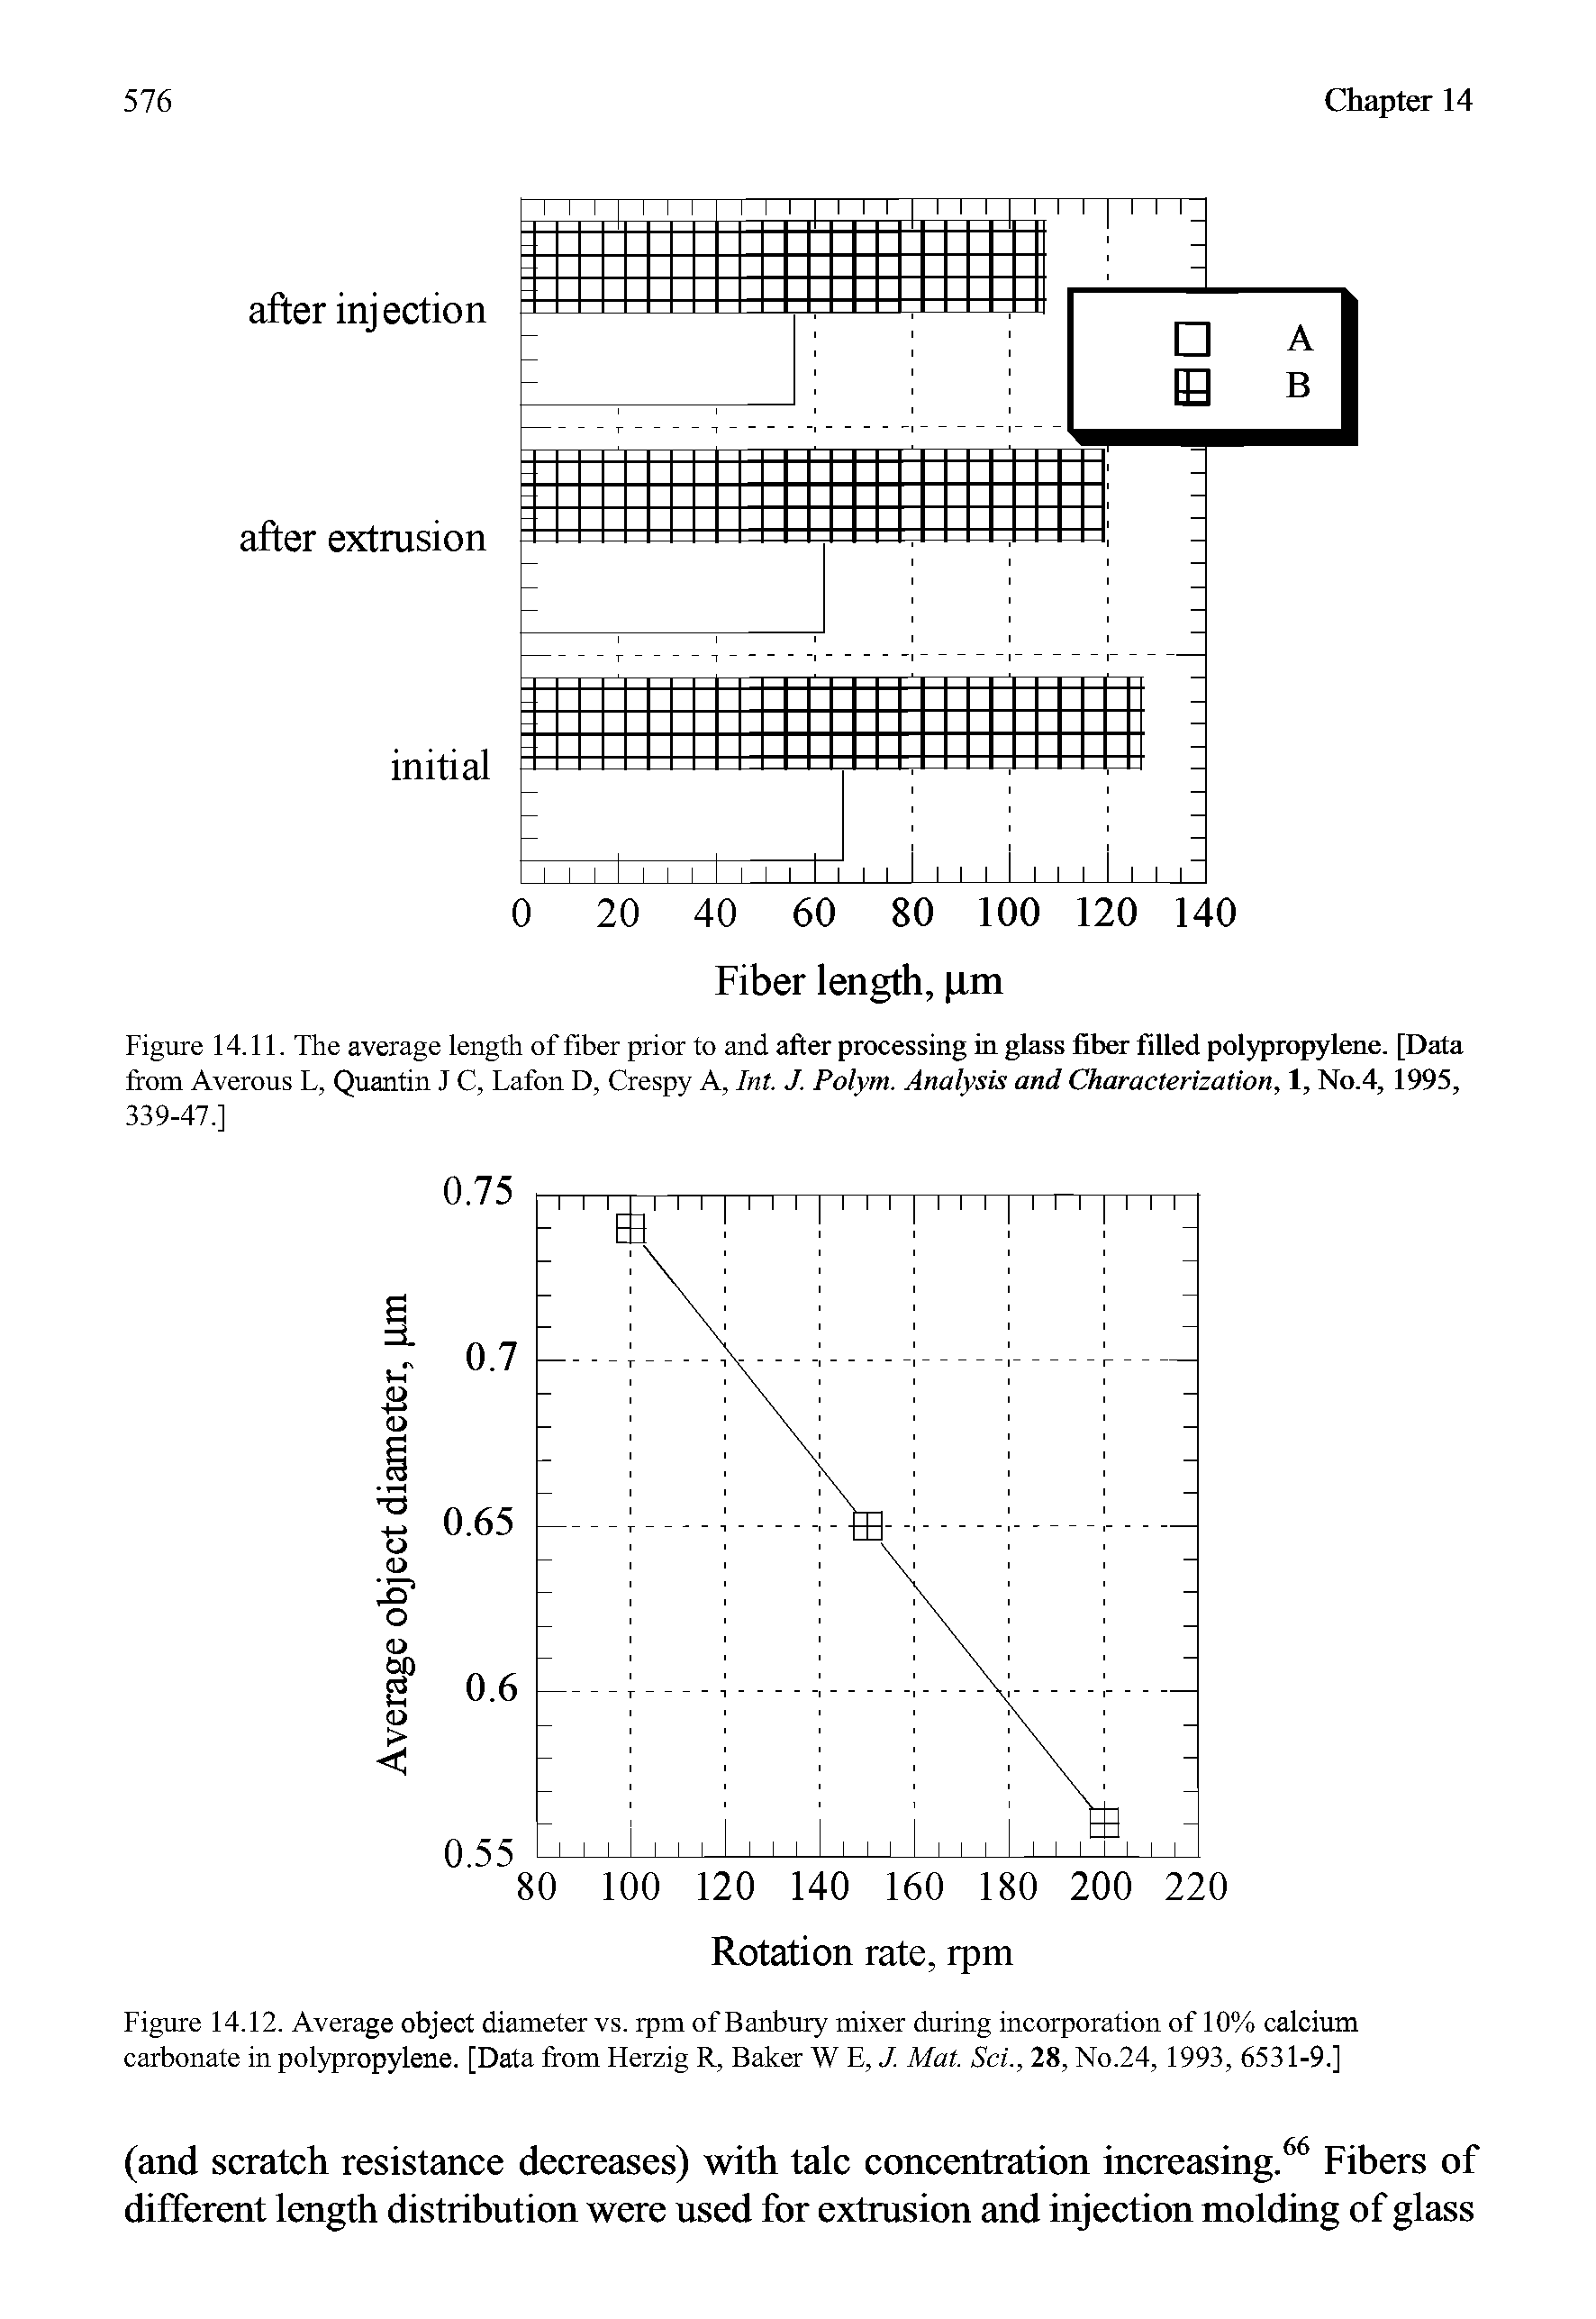 Figure 14.11. The average length of fiber prior to and after processing in glass fiber filled polypropylene. [Data from Averous L, Quantin J C, Lafon D, Crespy A, Int. J. Polym. Analysis and Characterization, 1, No.4, 1995, 339-47.1...